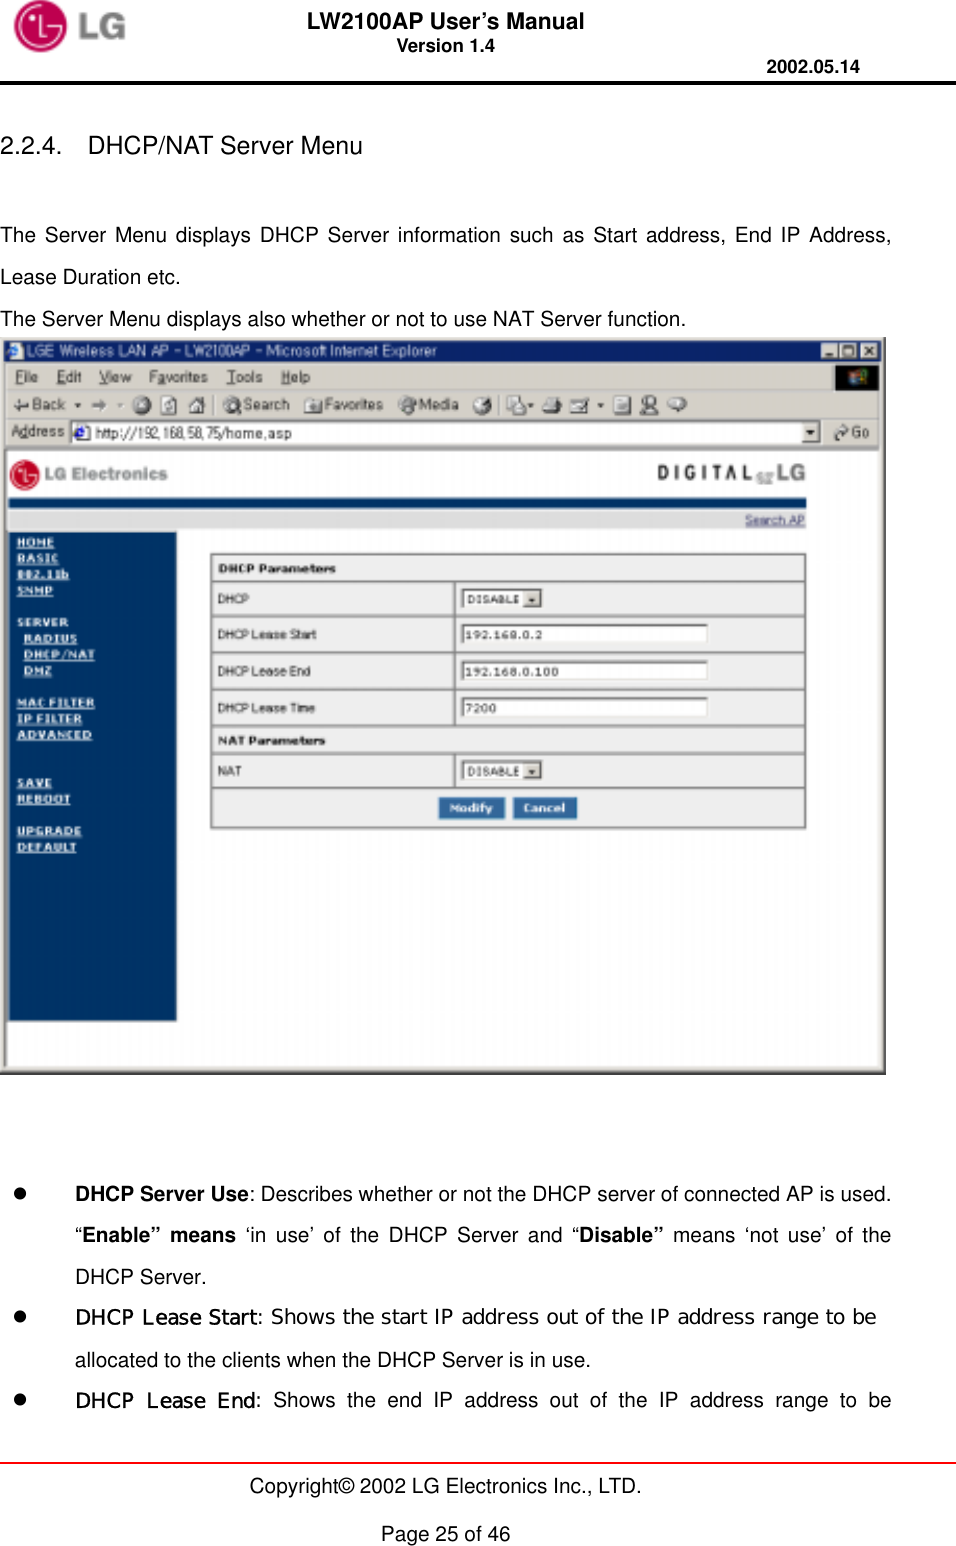 LW2100AP User’s Manual Version 1.4 2002.05.14   Copyright© 2002 LG Electronics Inc., LTD.  Page 25 of 46  2.2.4.  DHCP/NAT Server Menu  The Server Menu displays DHCP Server information such as Start address, End IP Address, Lease Duration etc. The Server Menu displays also whether or not to use NAT Server function.      DHCP Server Use: Describes whether or not the DHCP server of connected AP is used. “Enable” means ‘in use’ of the DHCP Server and “Disable” means ‘not use’ of the DHCP Server.   DHCP Lease Start: Shows the start IP address out of the IP address range to be  allocated to the clients when the DHCP Server is in use.       DHCP Lease End: Shows the end IP address out of the IP address range to be 